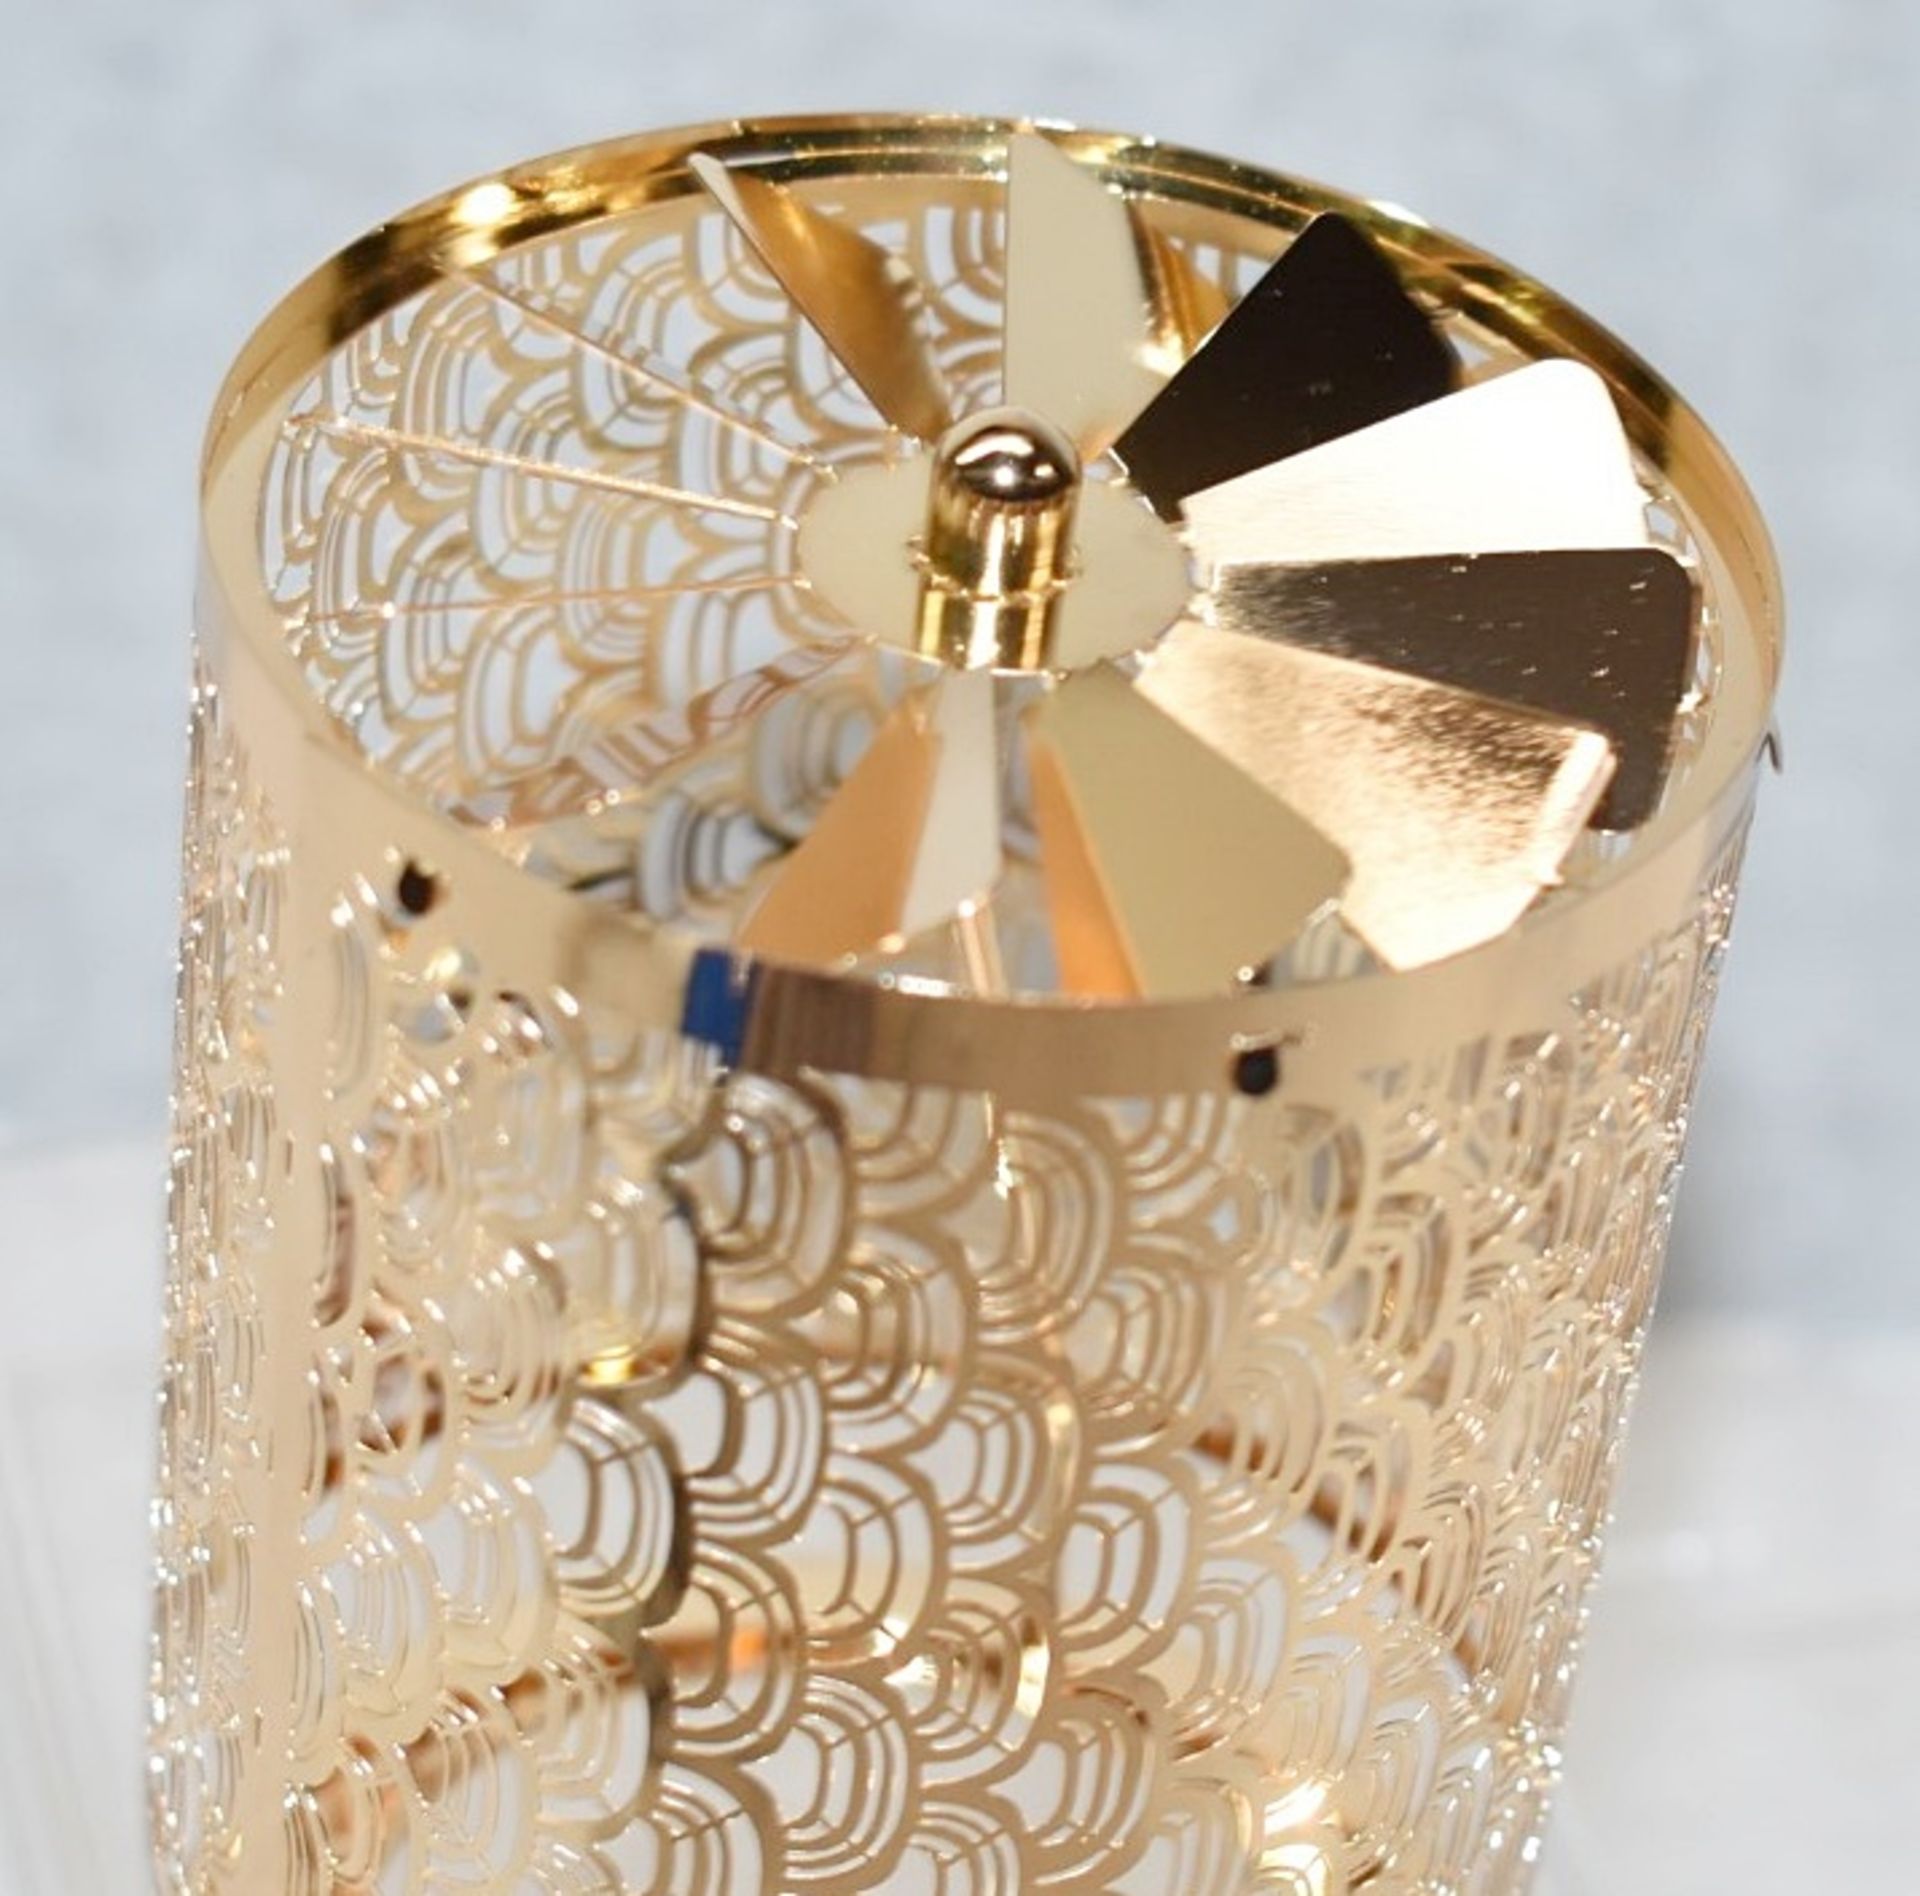 1 x DIPTYQUE Le Redouté Candle Mounted Lantern - Original Price £73.00 - Unused Boxed Stock - Ref: - Image 4 of 5